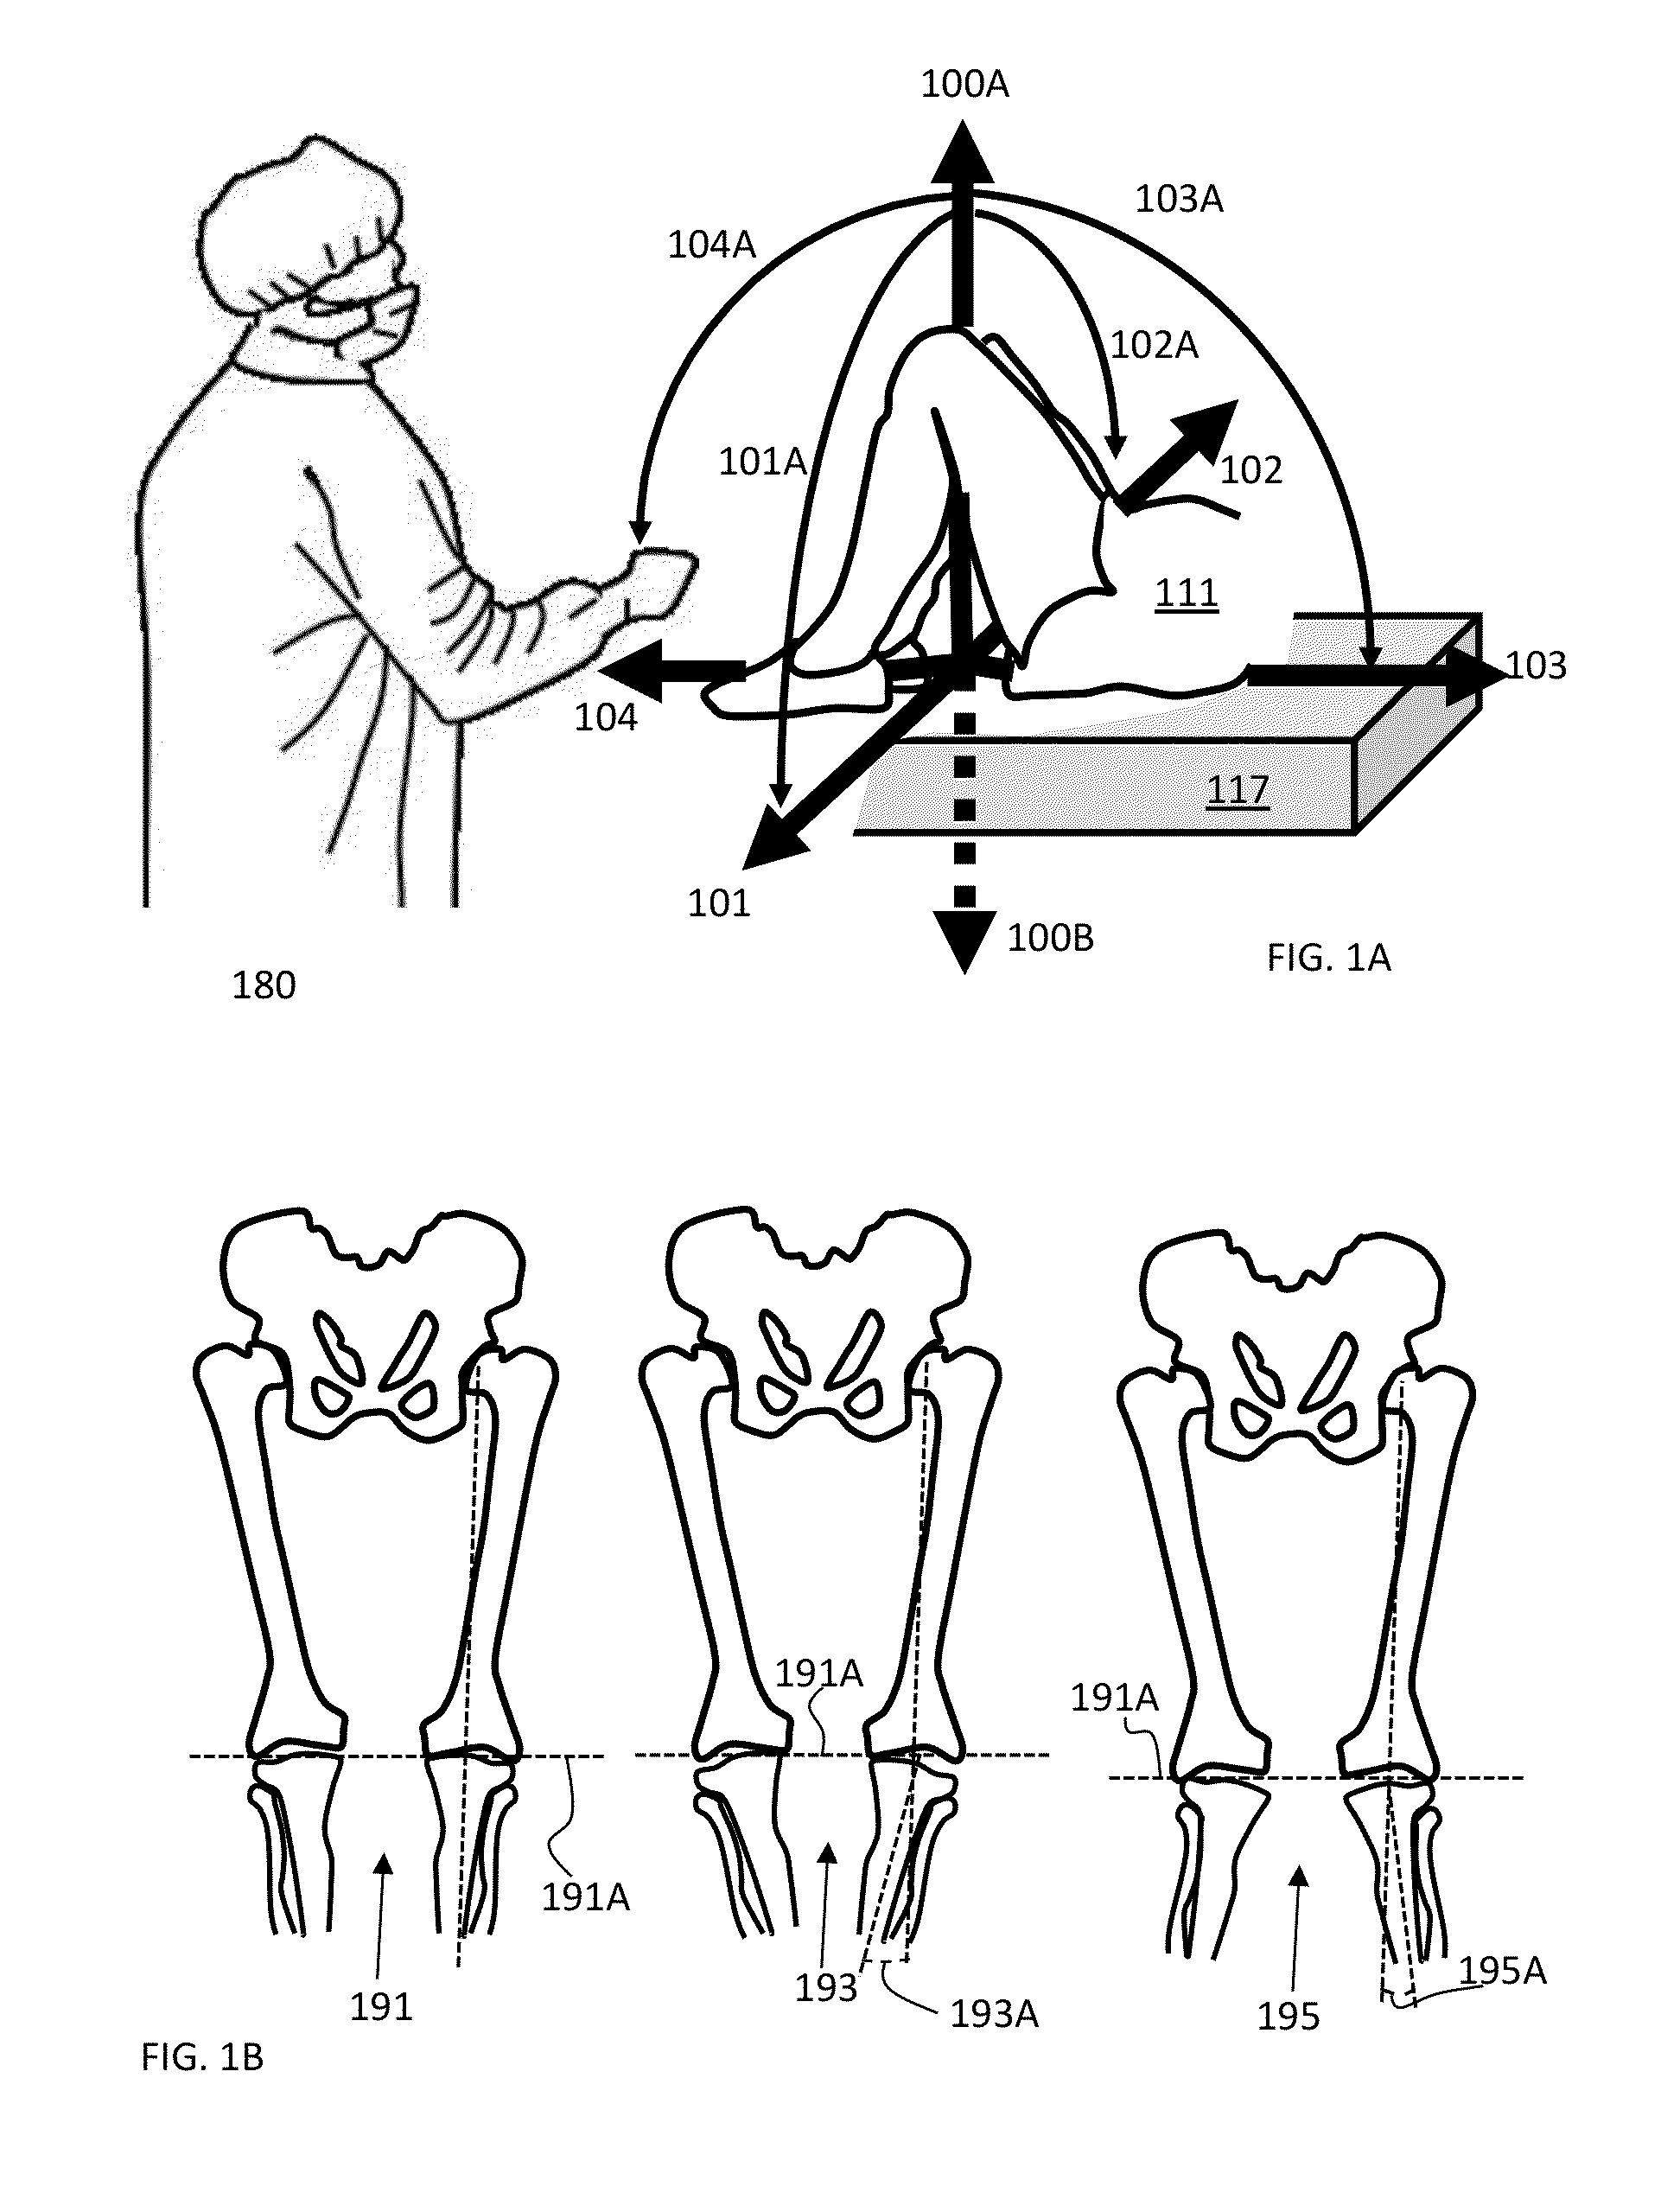 System and method for measuring muscular-skeletal alignment to a mechanical axis